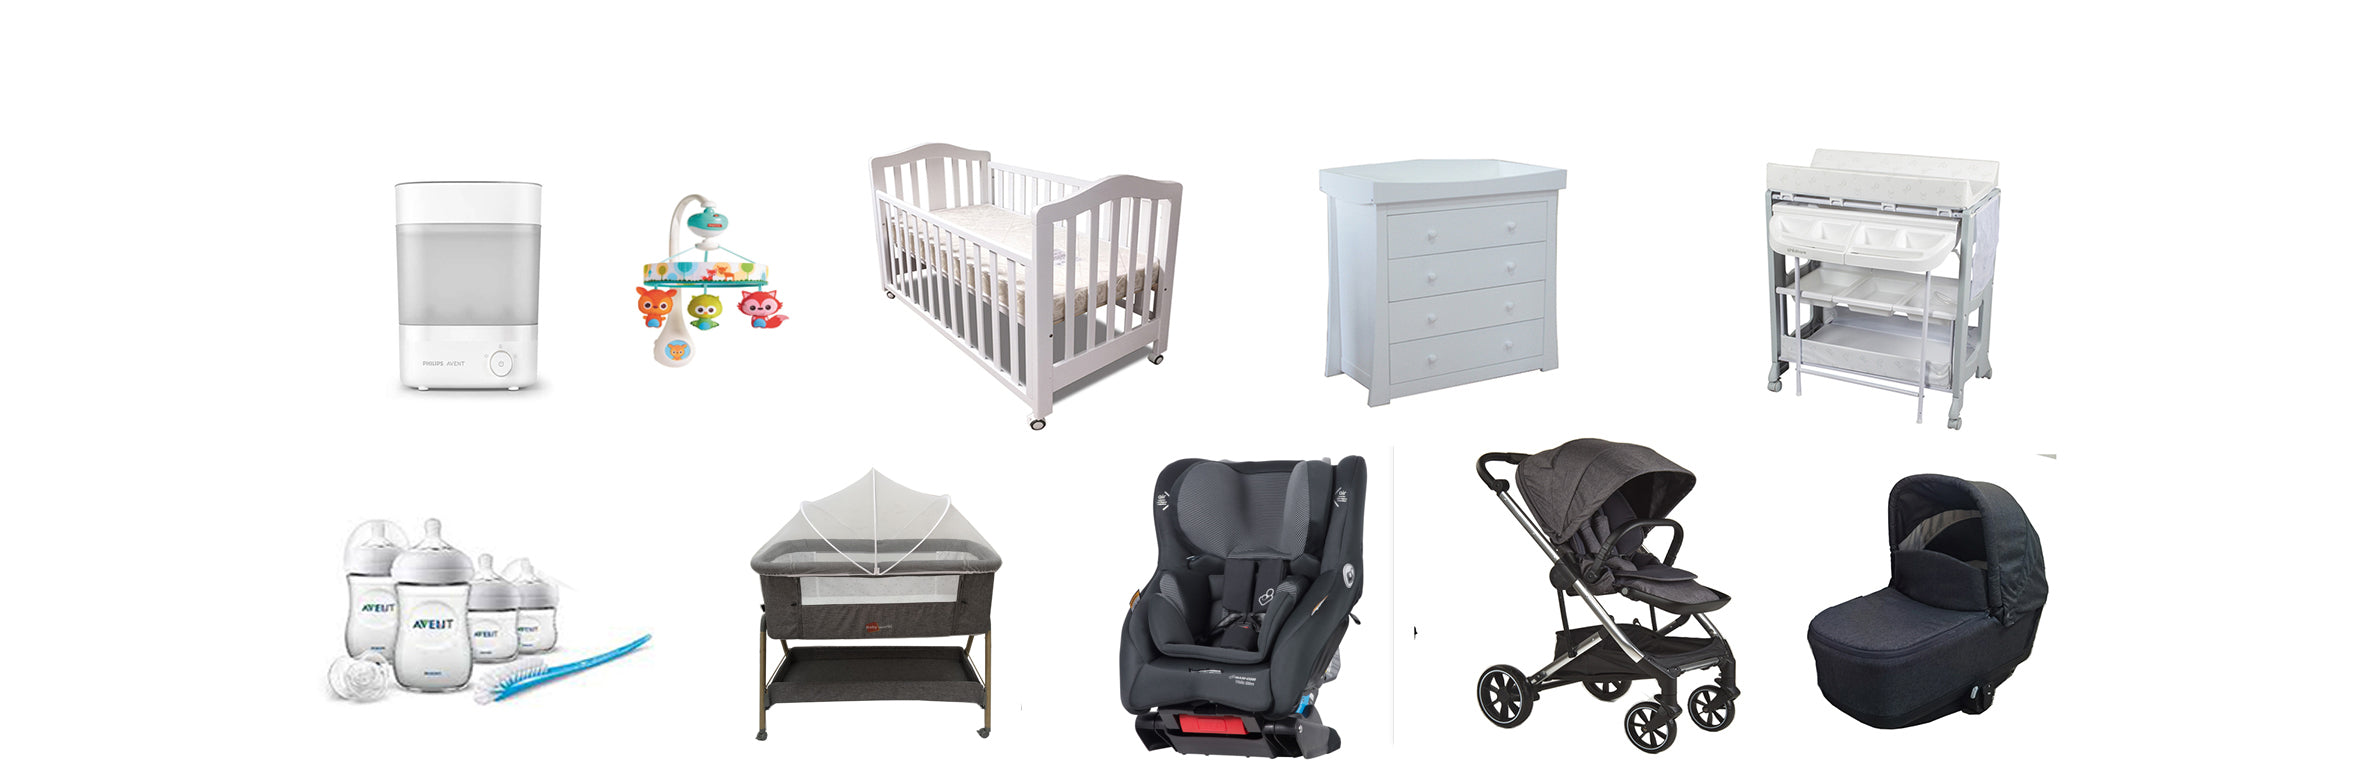 Newvorn baby delux package 3a